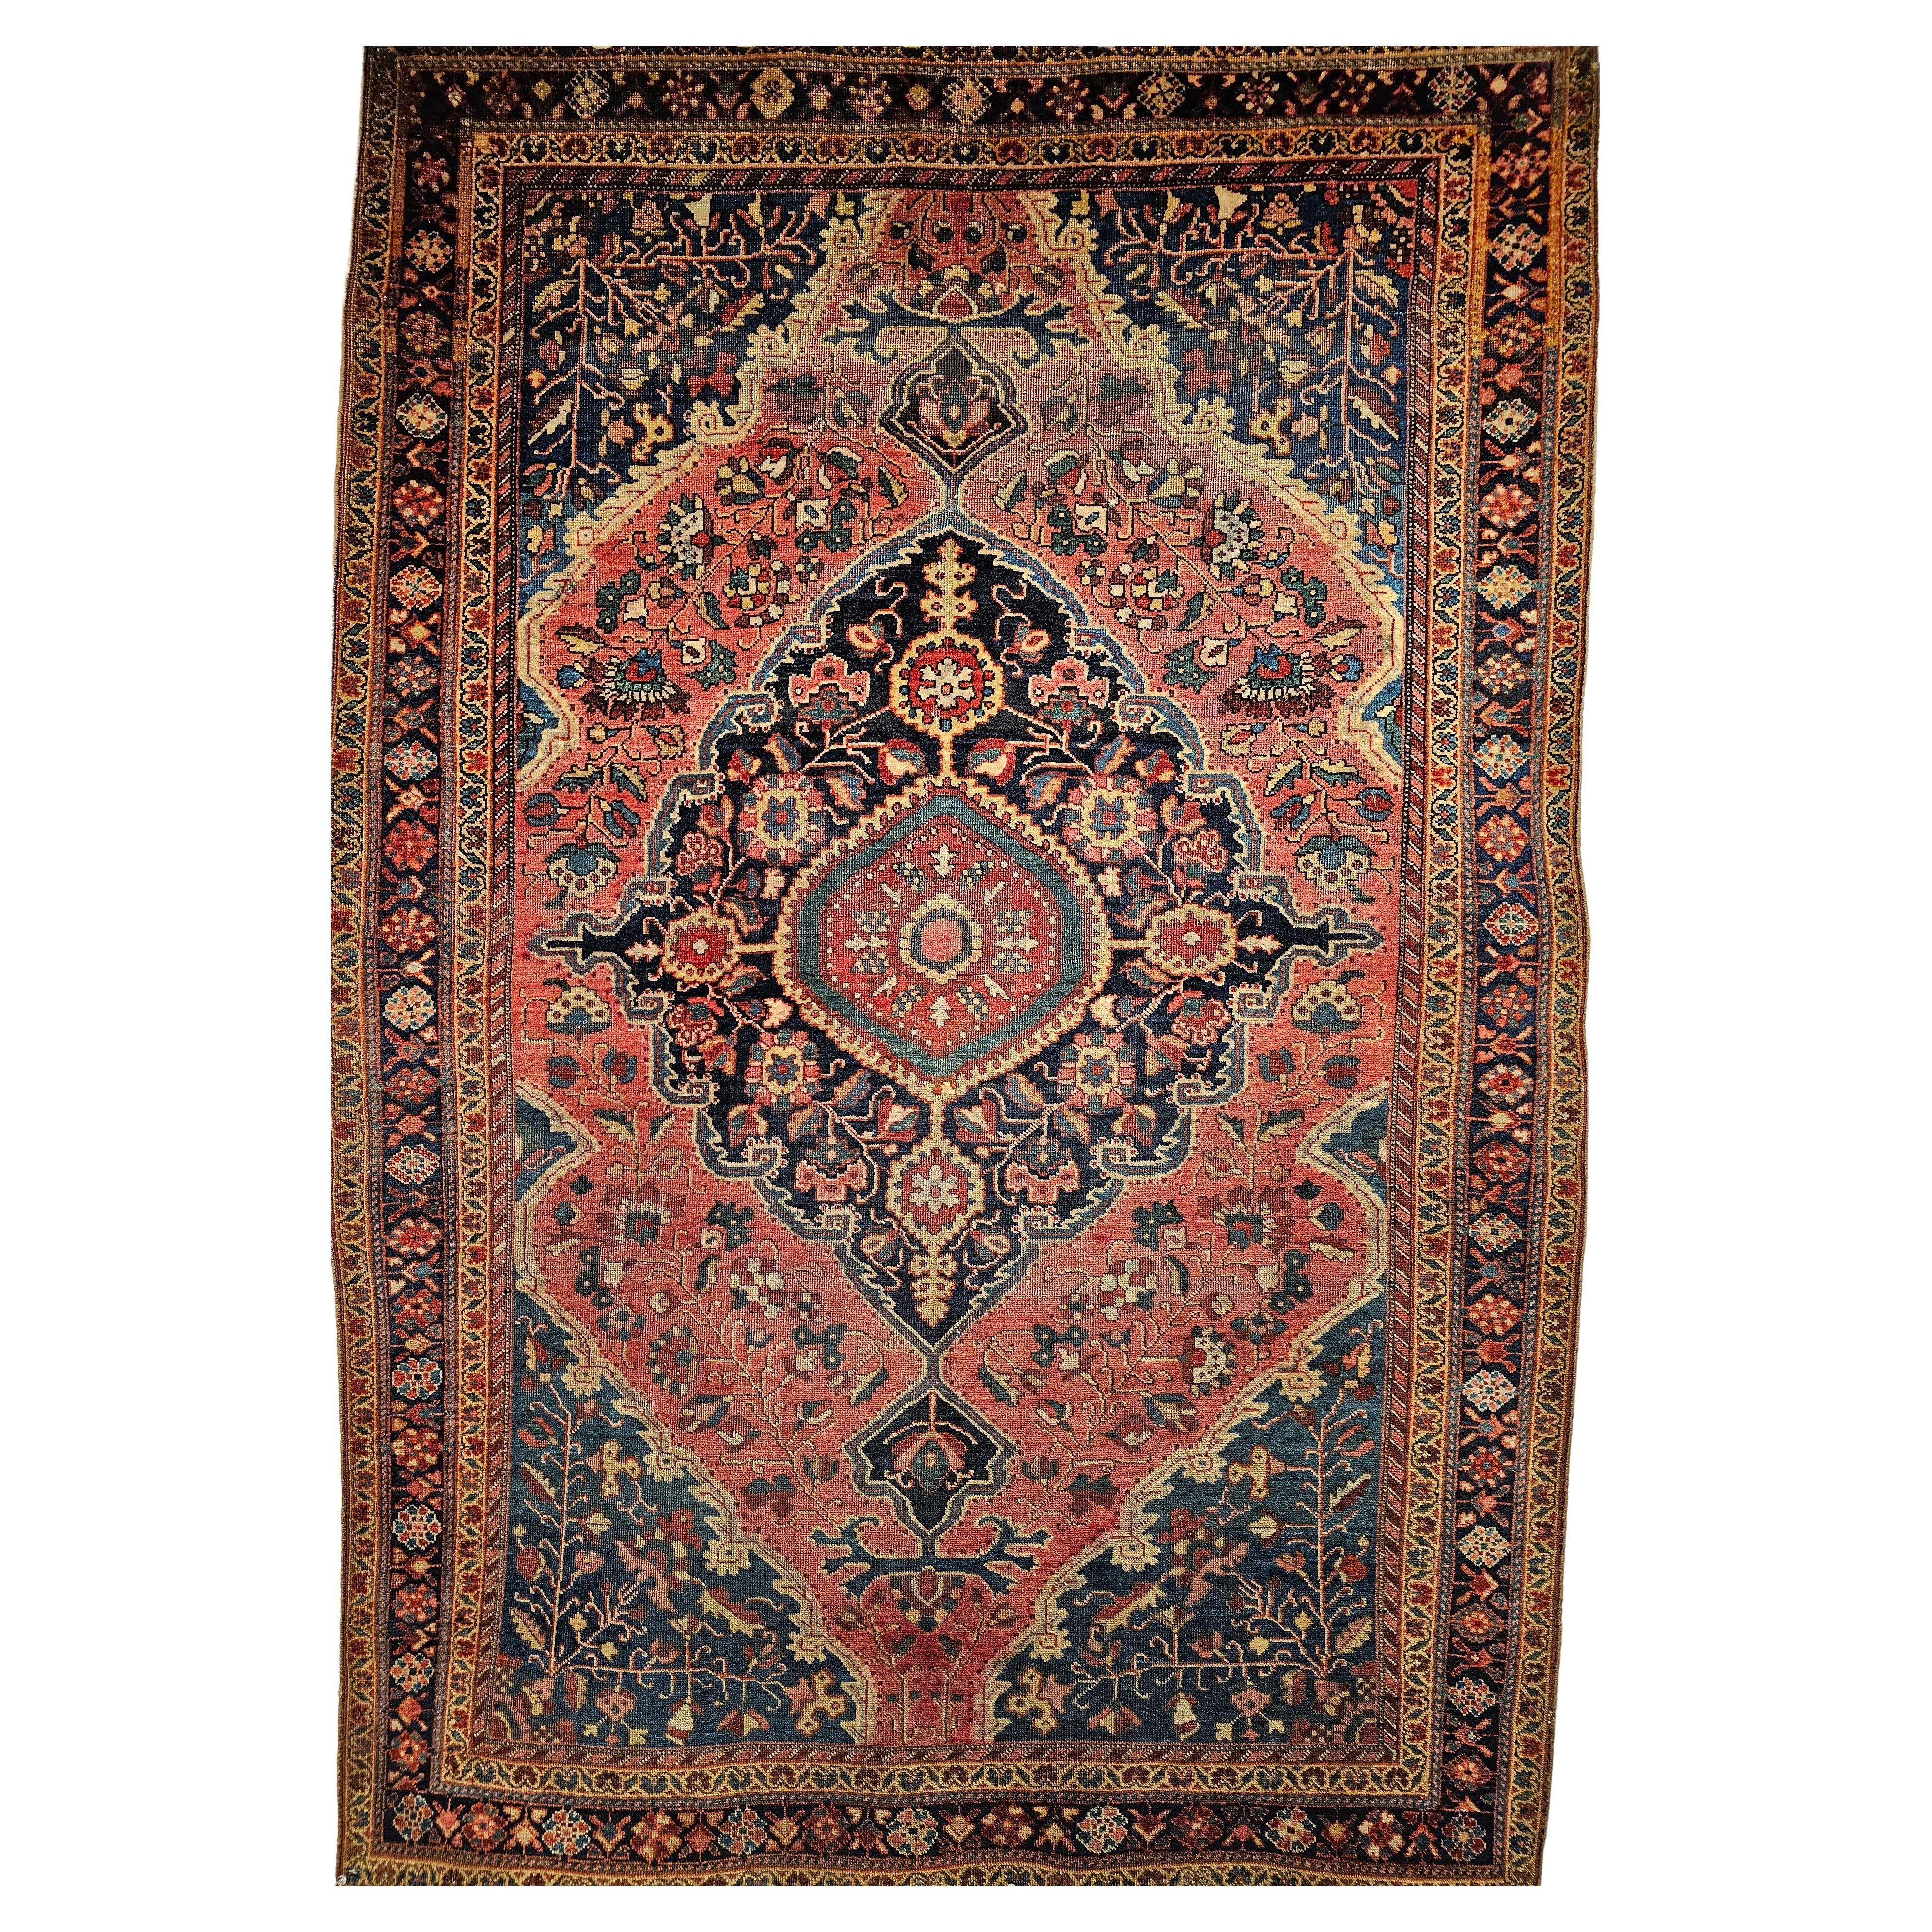 19th Century Persian Farahan Sarouk Area Rug in Rust Red, French Blue, Navy Blue For Sale